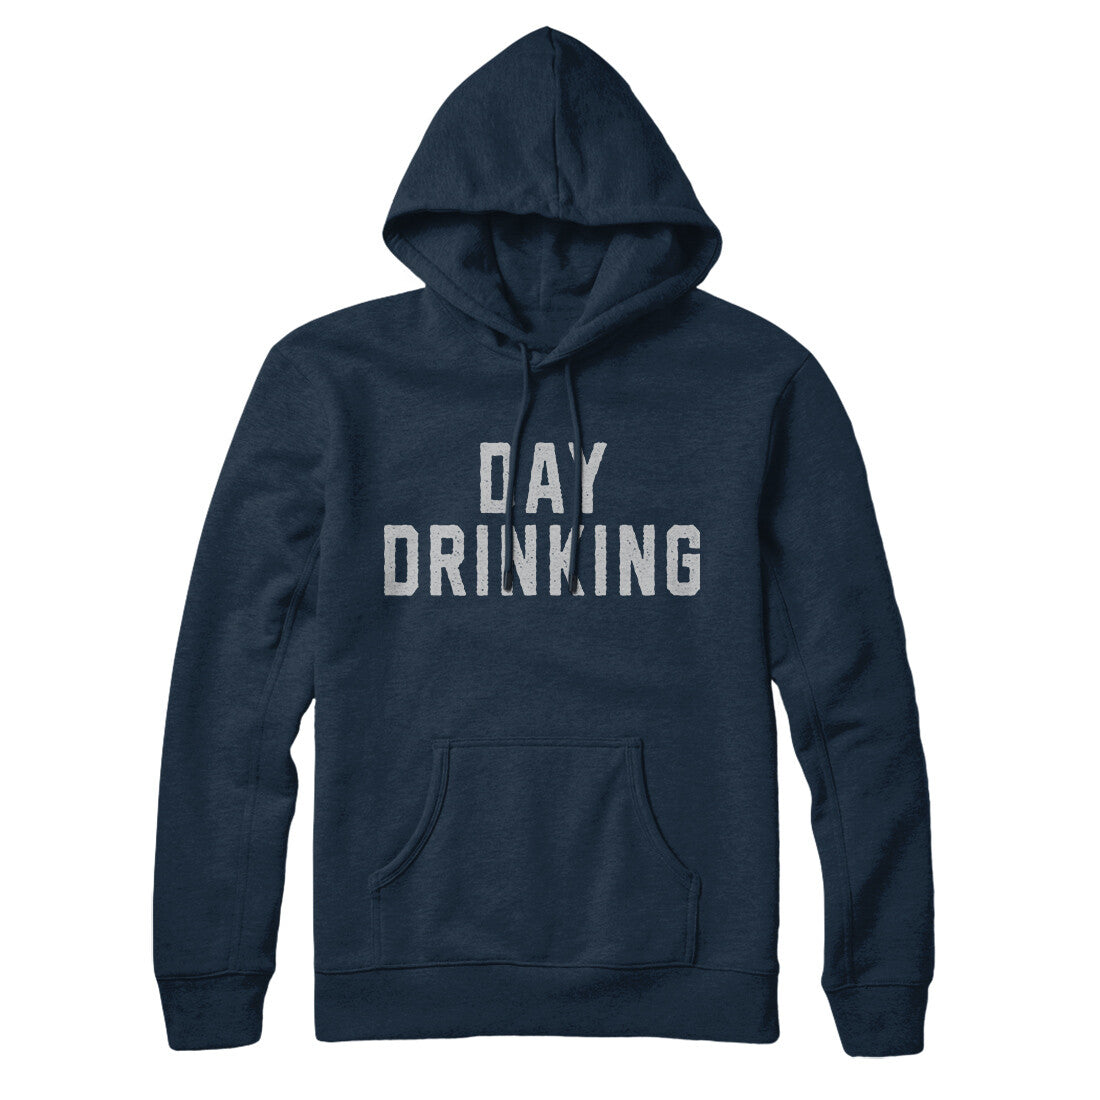 Day Drinking in Navy Blue Color